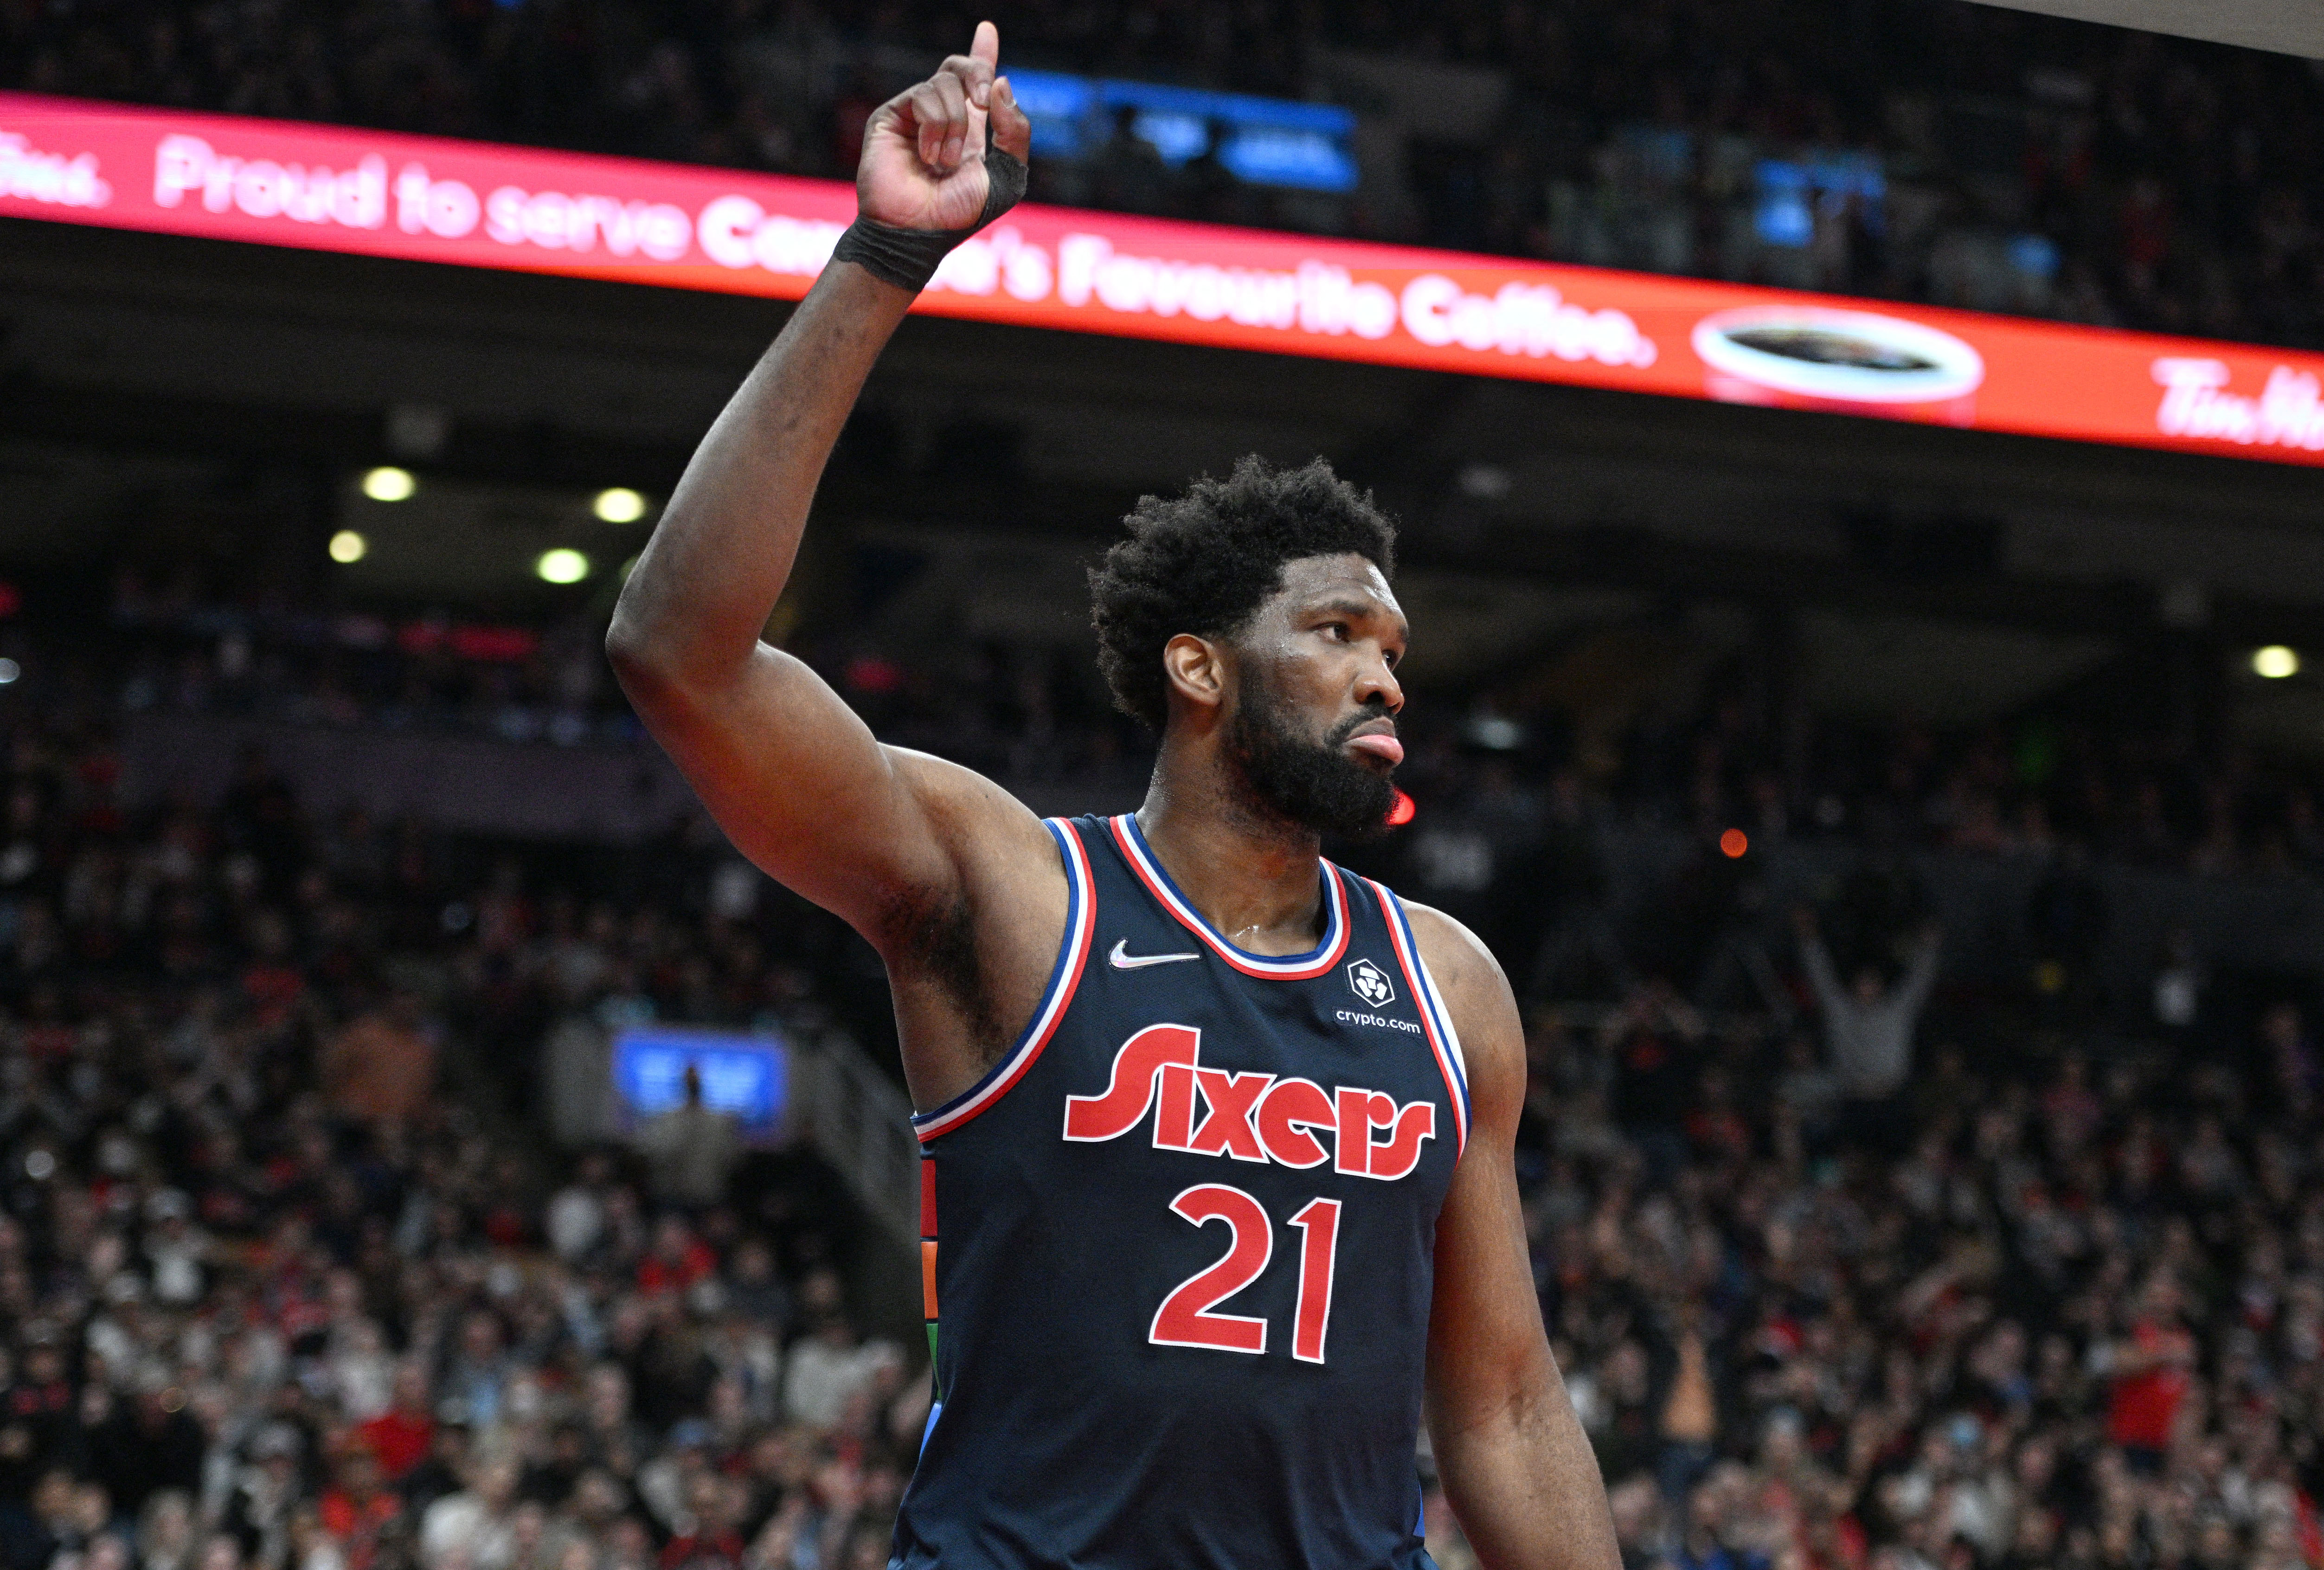 Philadelphia 76ers star Joel Embiid obtains American citizenship but what jersey will he wear in Paris 2024?